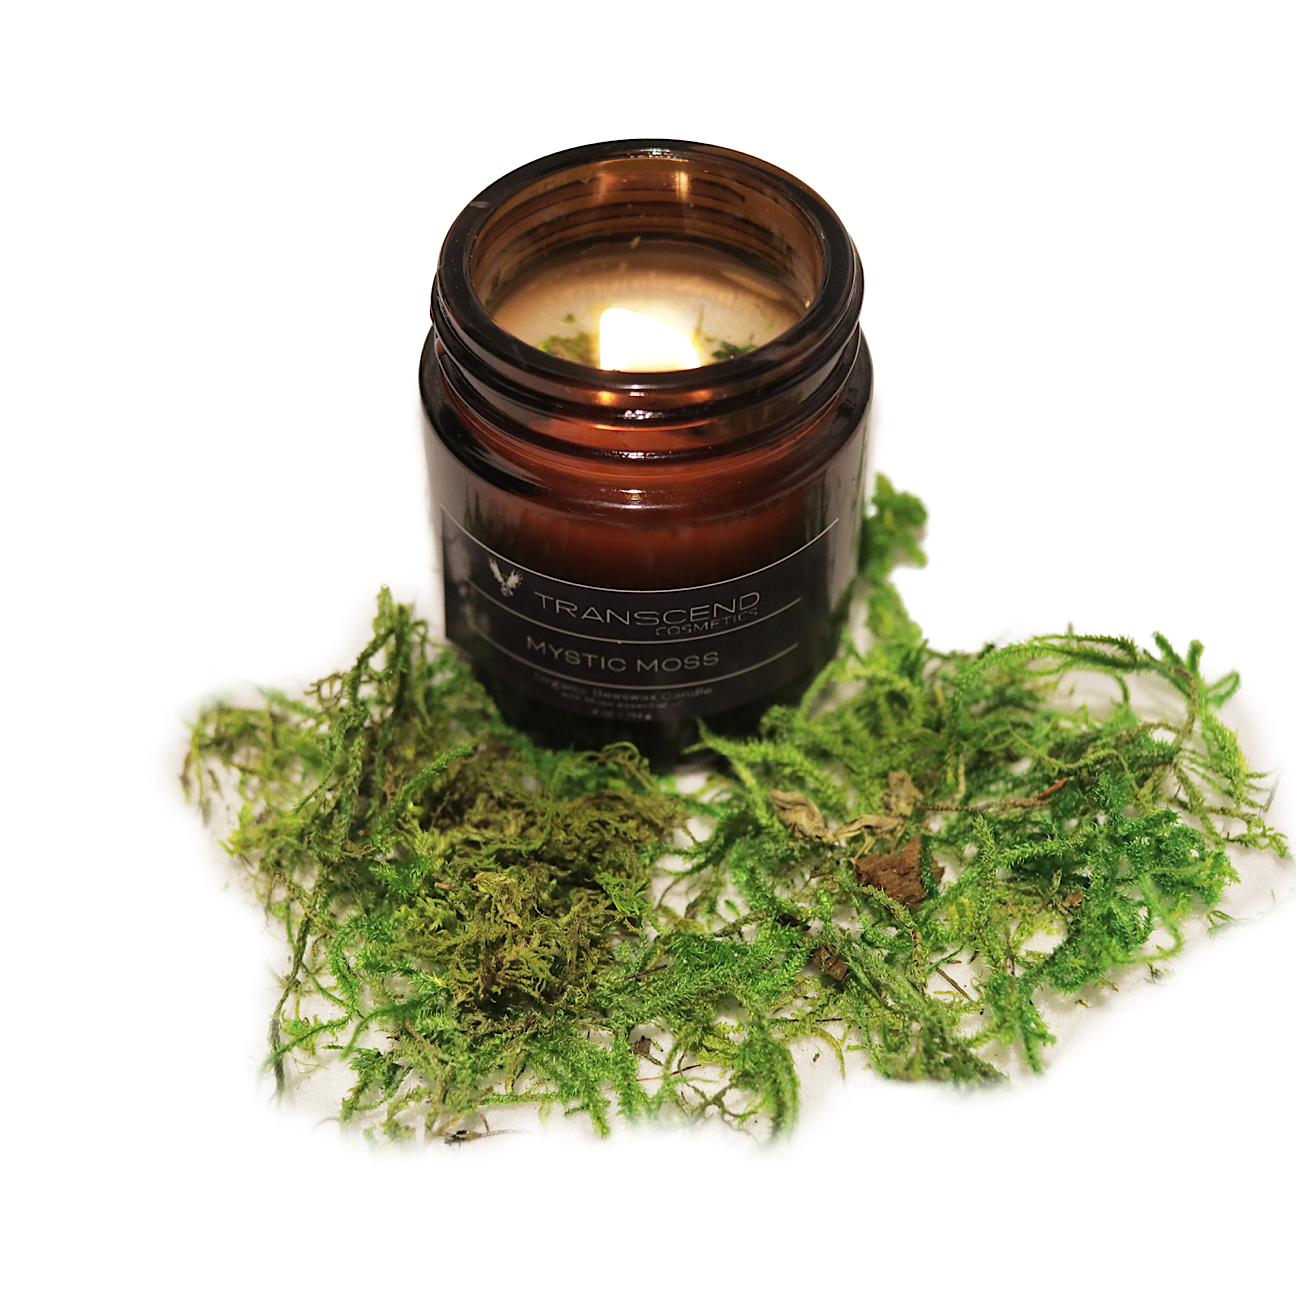 organic candle, transcend cosmetics candle, transcend cosmetics, transcend cosmetics beeswax candle,essential oil, essential oil candle, candle, beeswax candle, mystic moss, mystic moss candle, mystic moss beeswax candle, moss candle